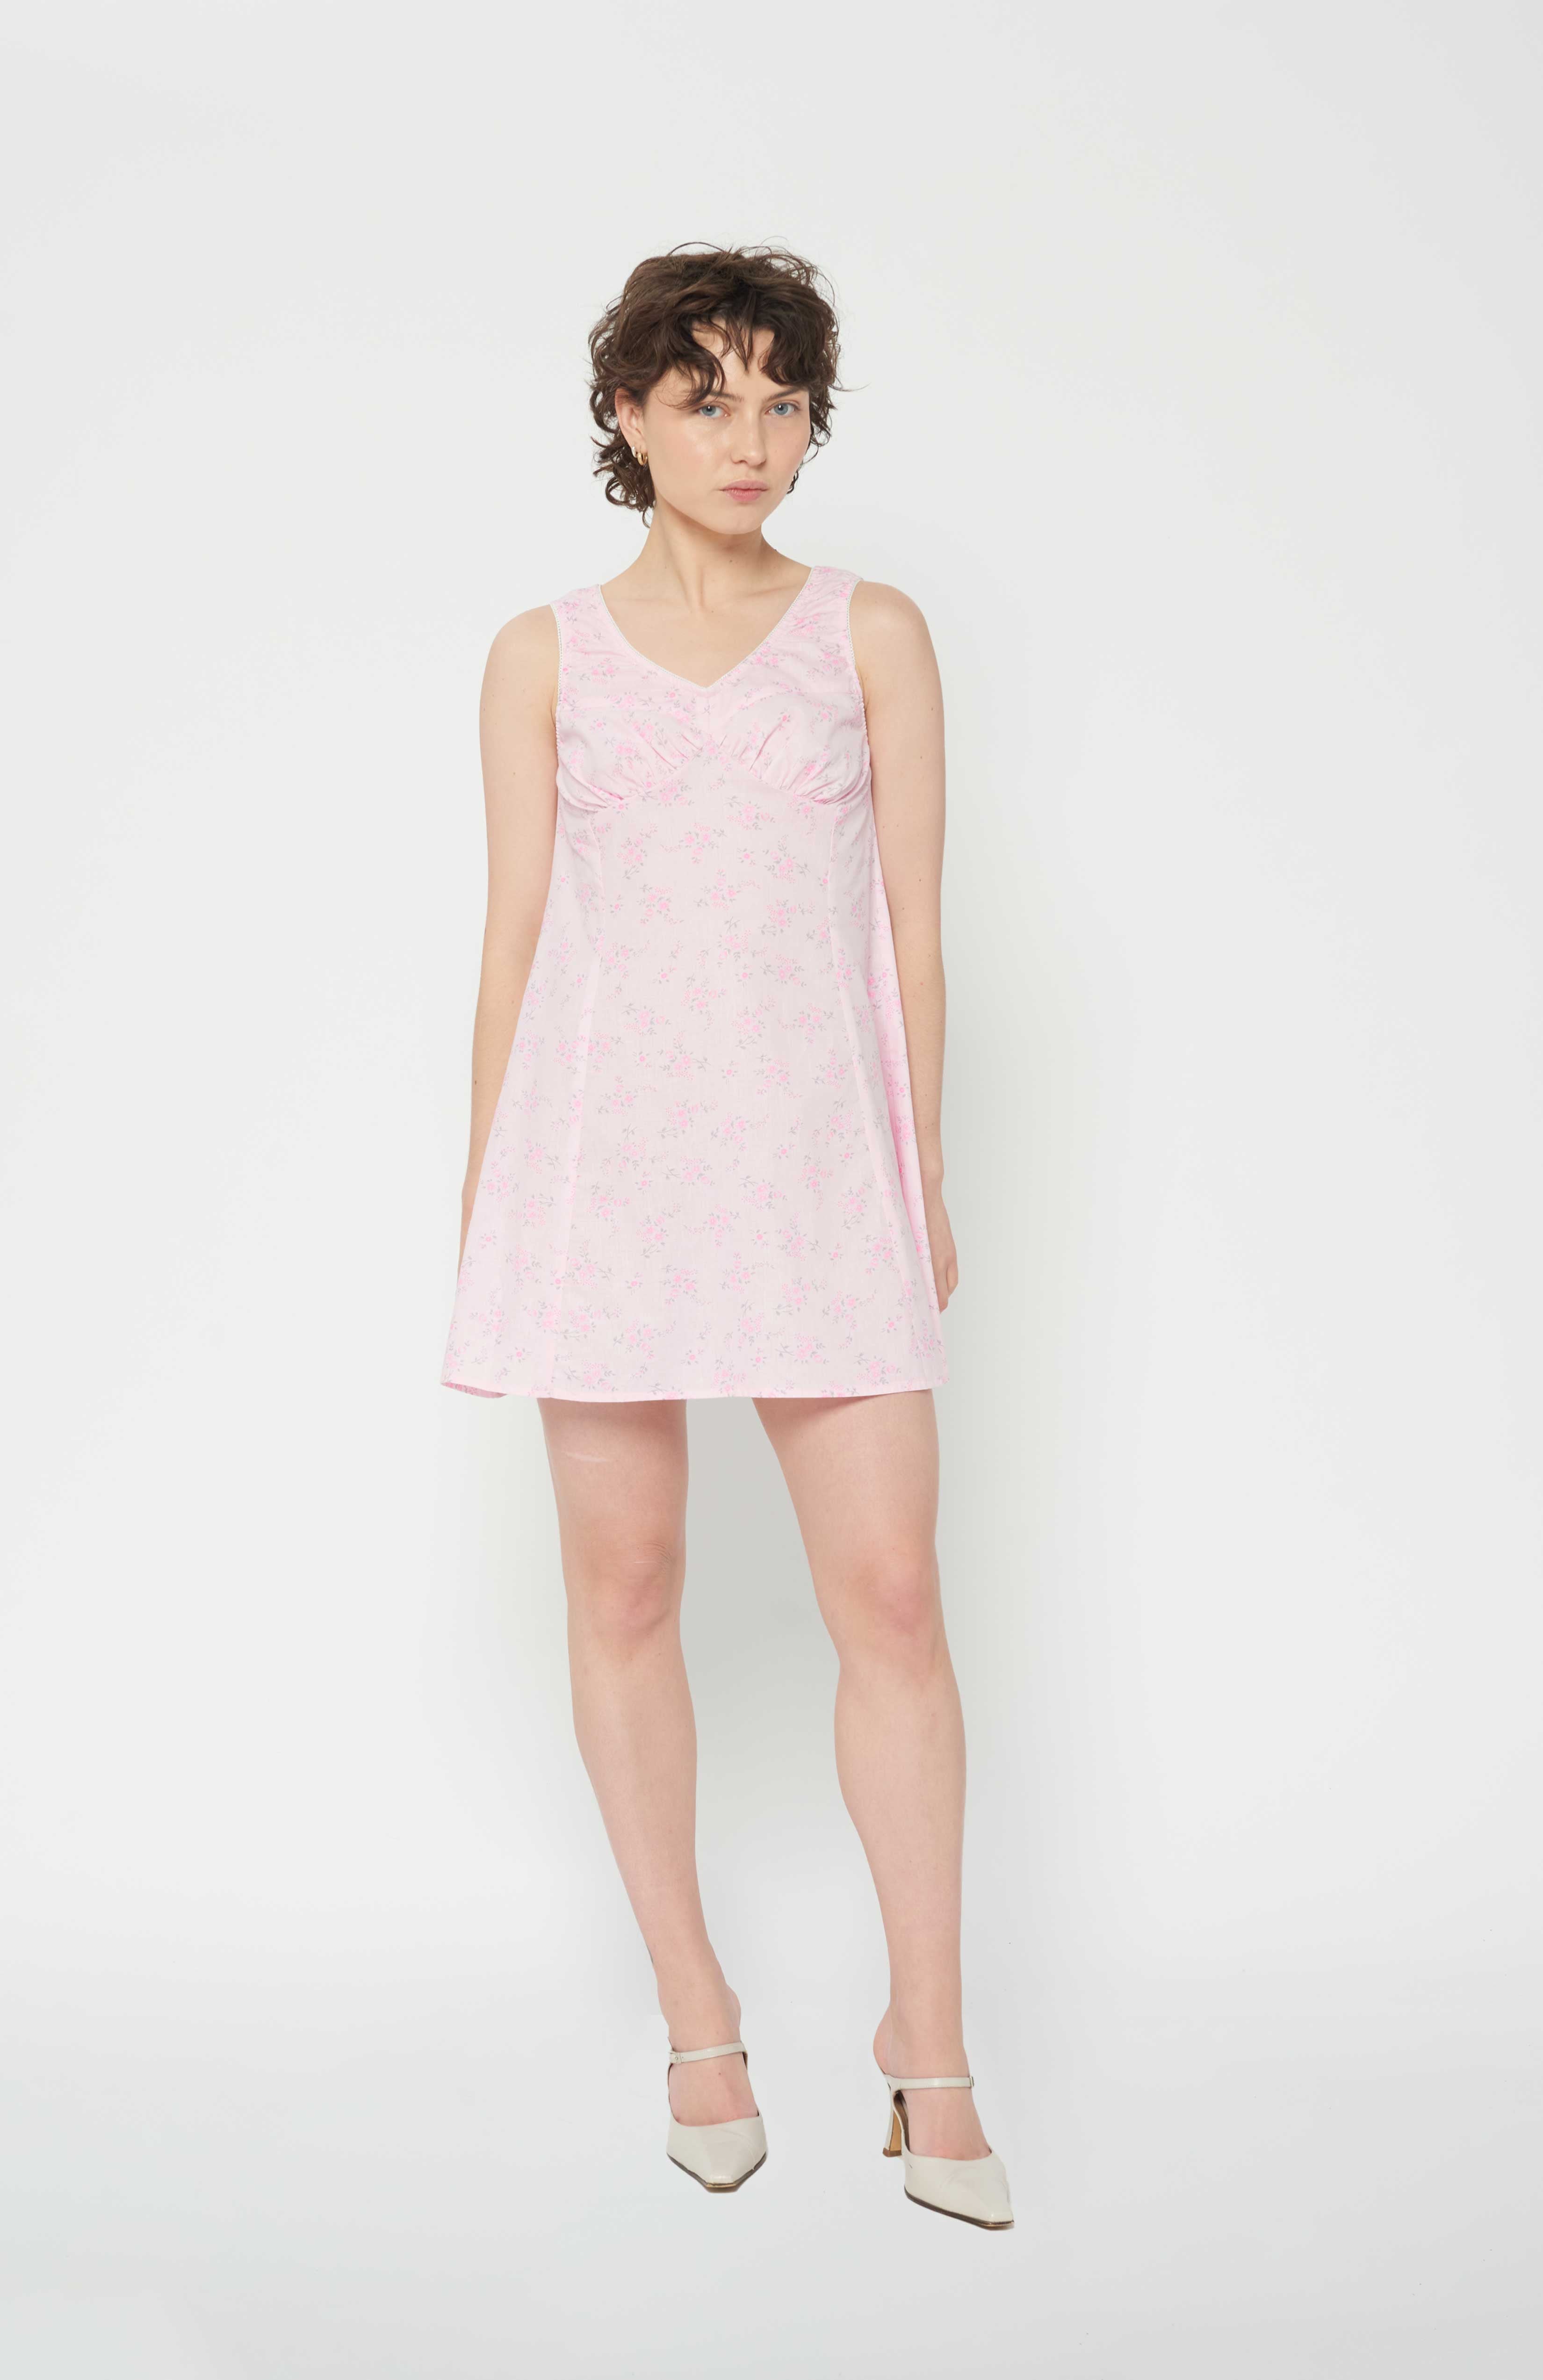 Maroske Peech pink cotton babydoll dress inspired by slip on vintage nighties. This style is sweetly gathered at the bust and lightly A-lined that creates a feminine shape. features scalloped elastic finishings.